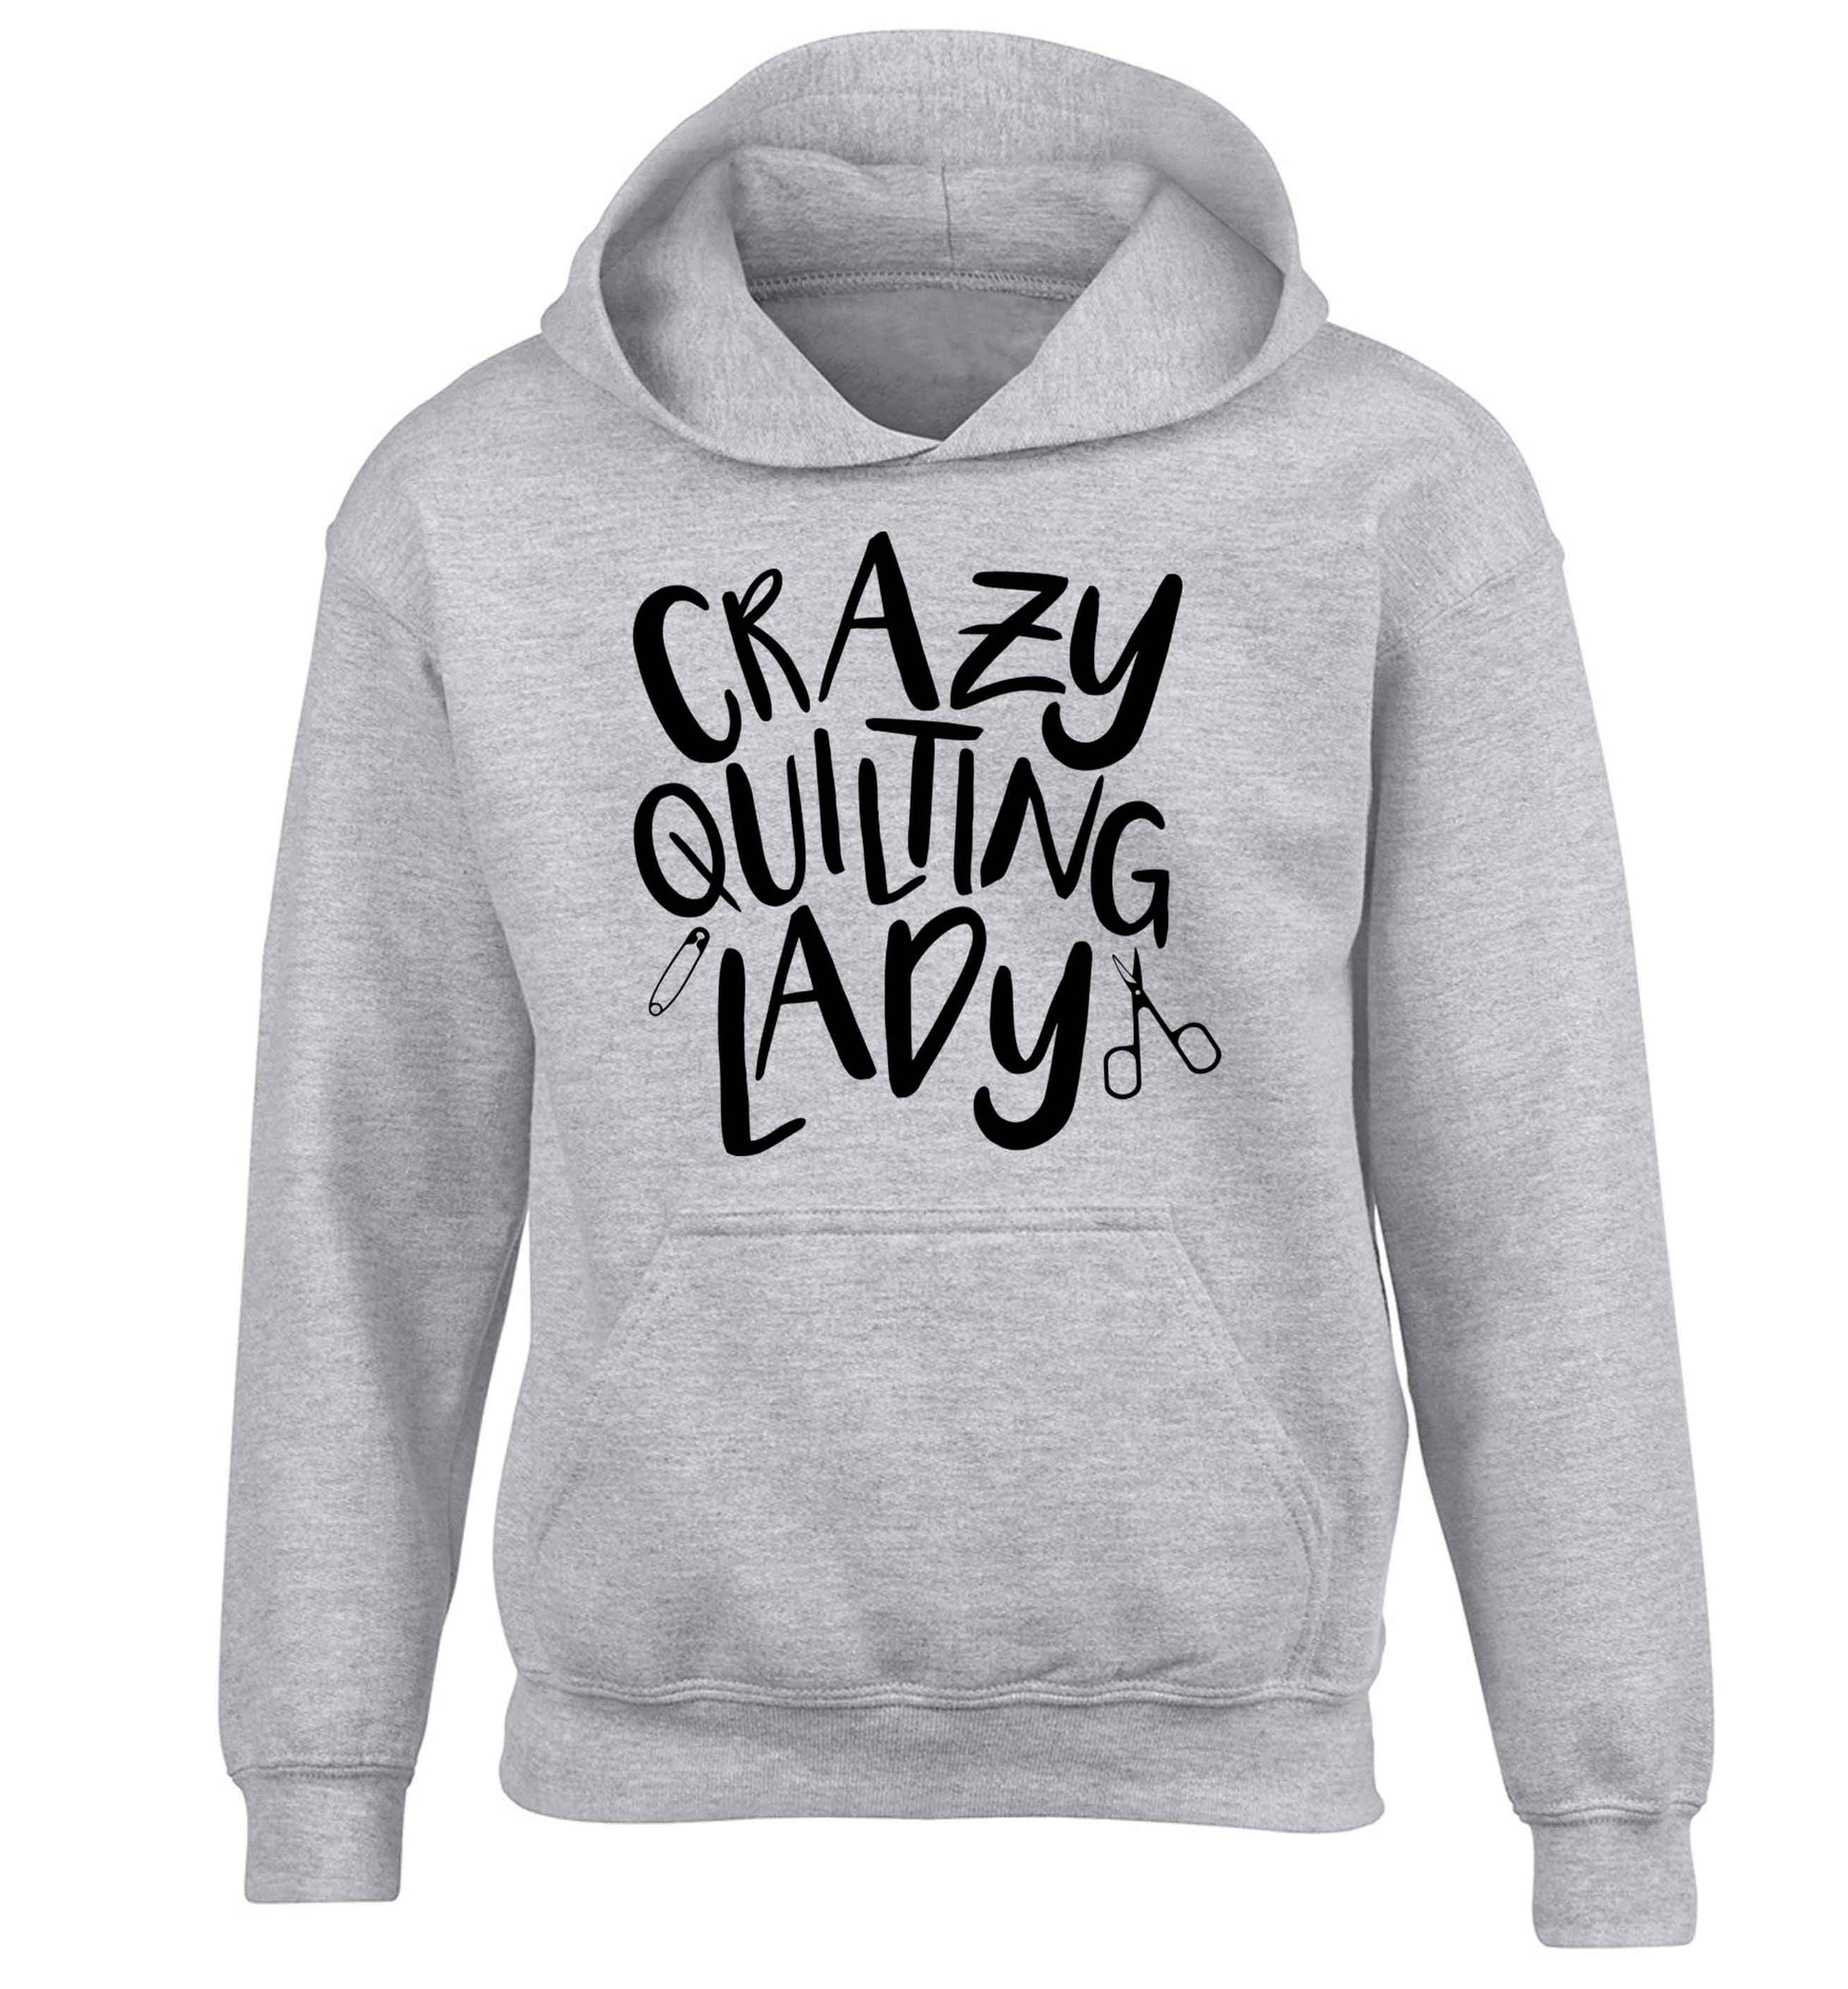 Crazy quilting lady children's grey hoodie 12-13 Years